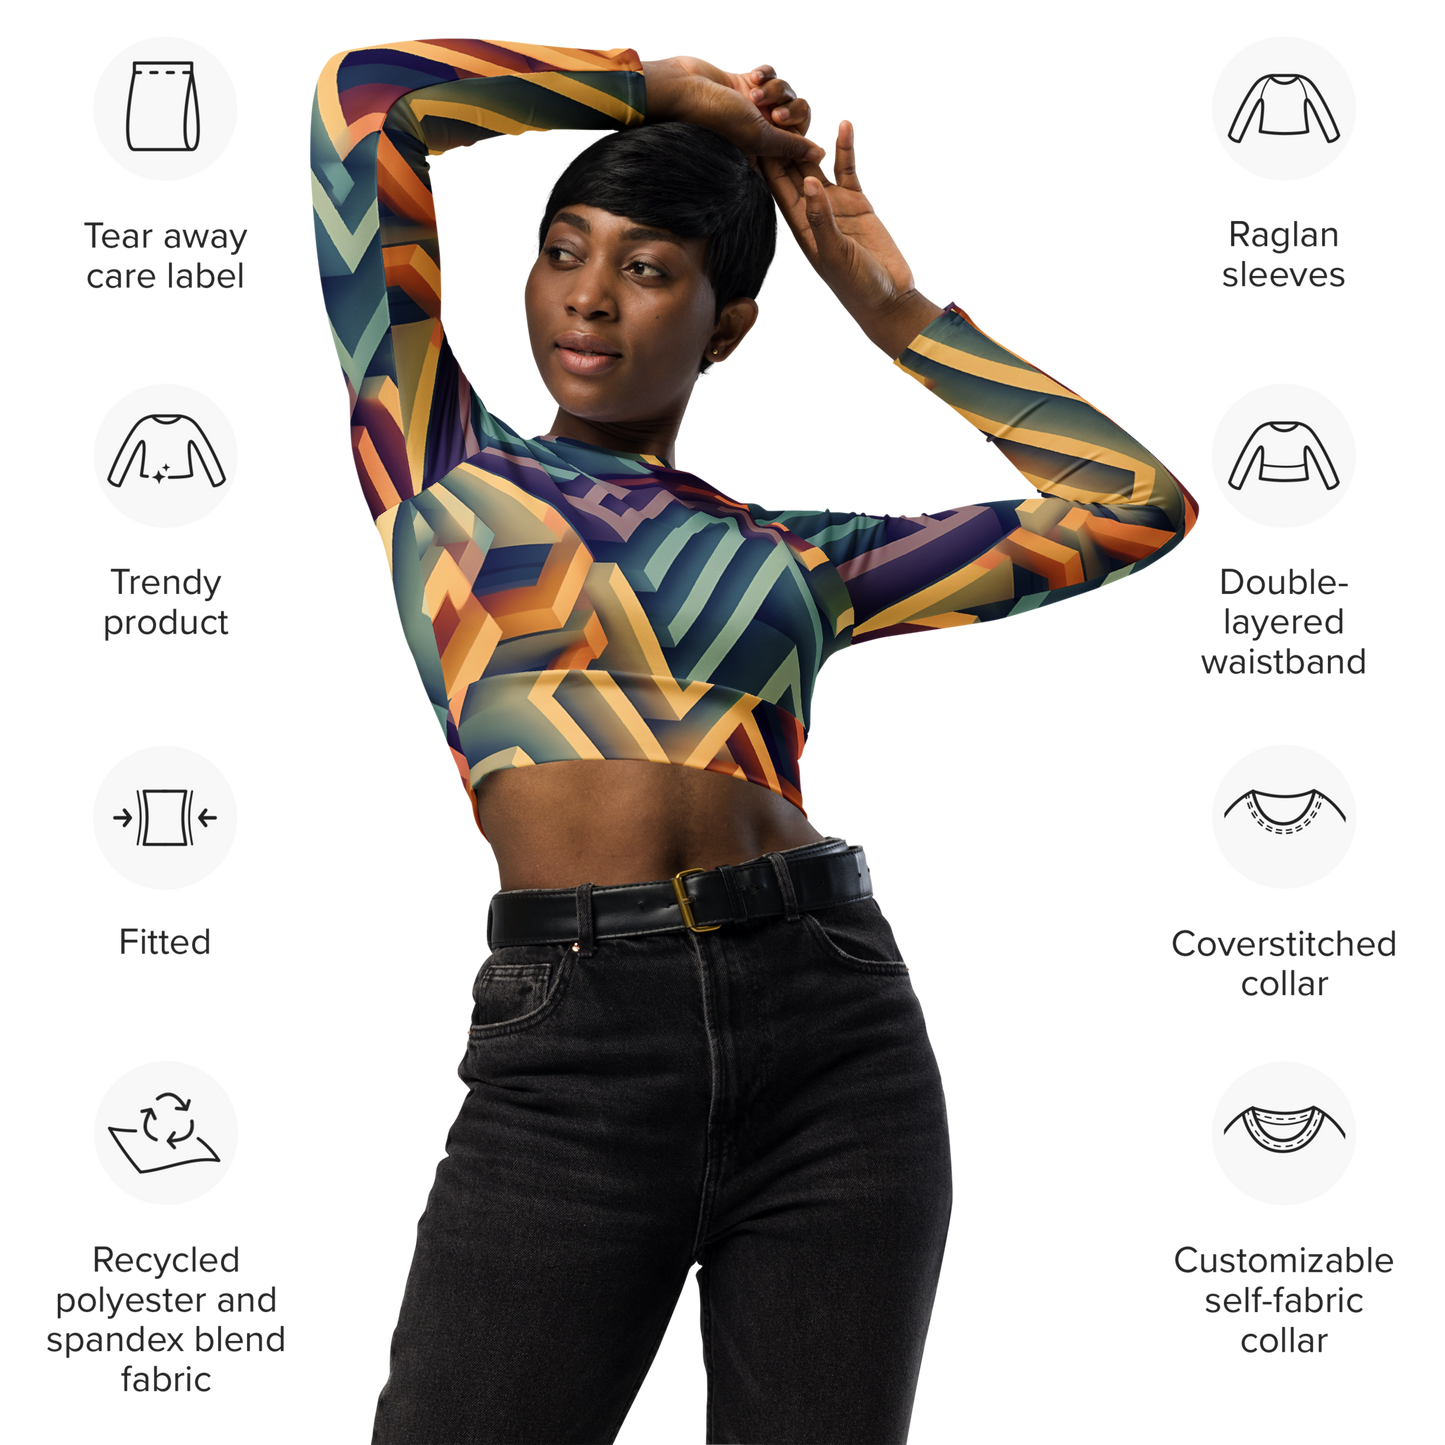 3D Maze Illusion | 3D Patterns | All-Over Print Recycled Long Sleeve Crop Top - #3